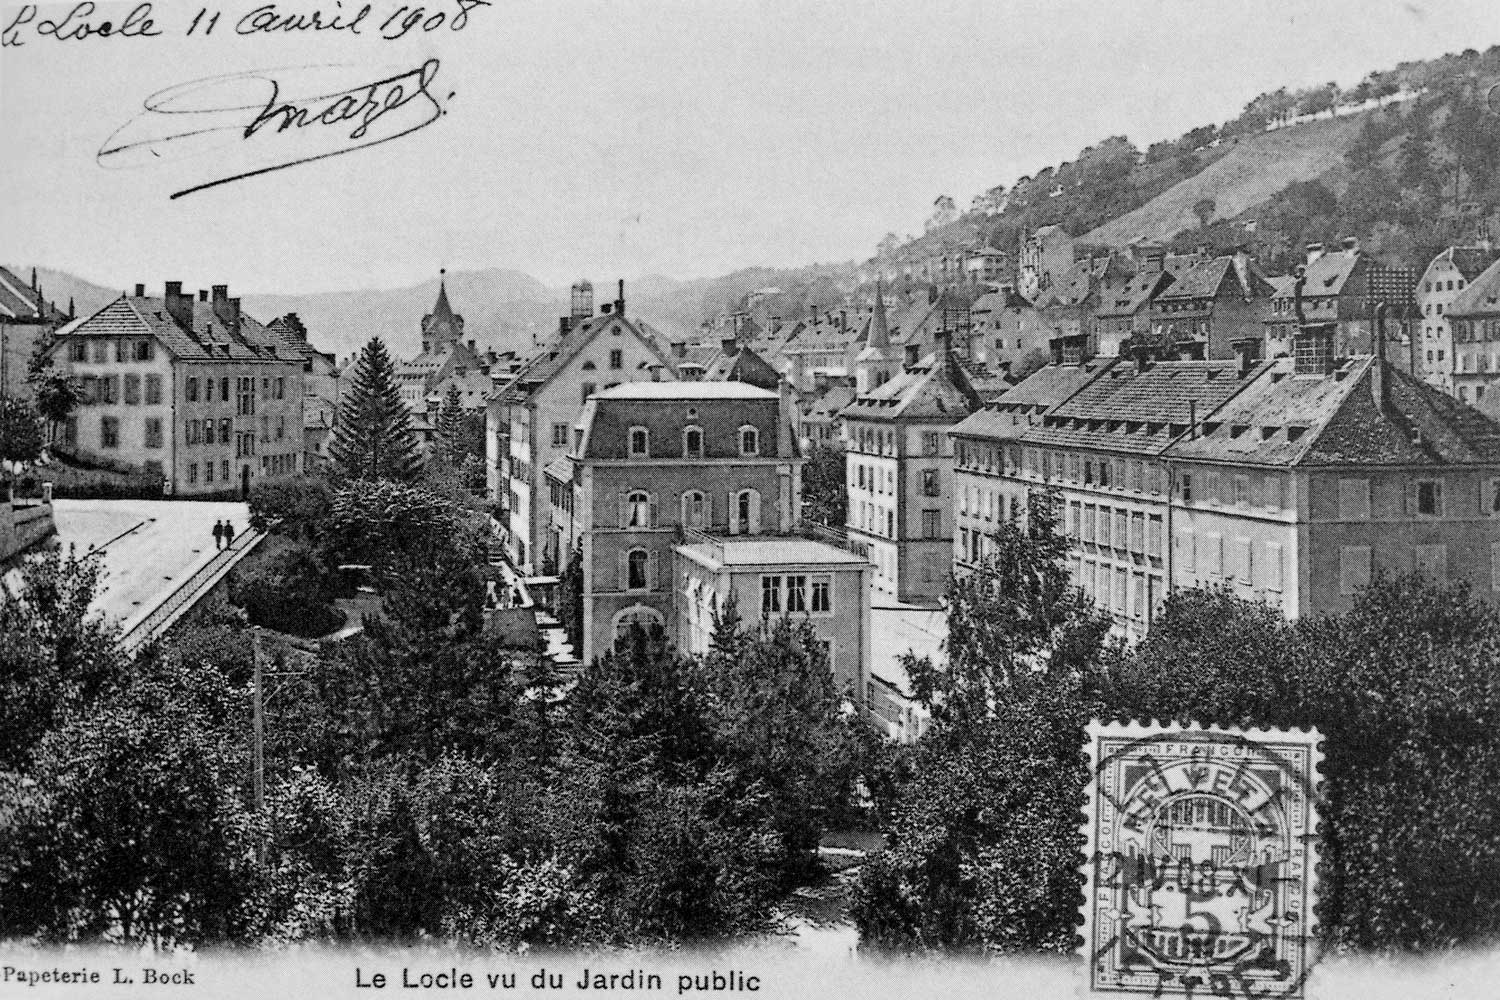 Ulysse Nardin’s Le Locle headquarters in 1908